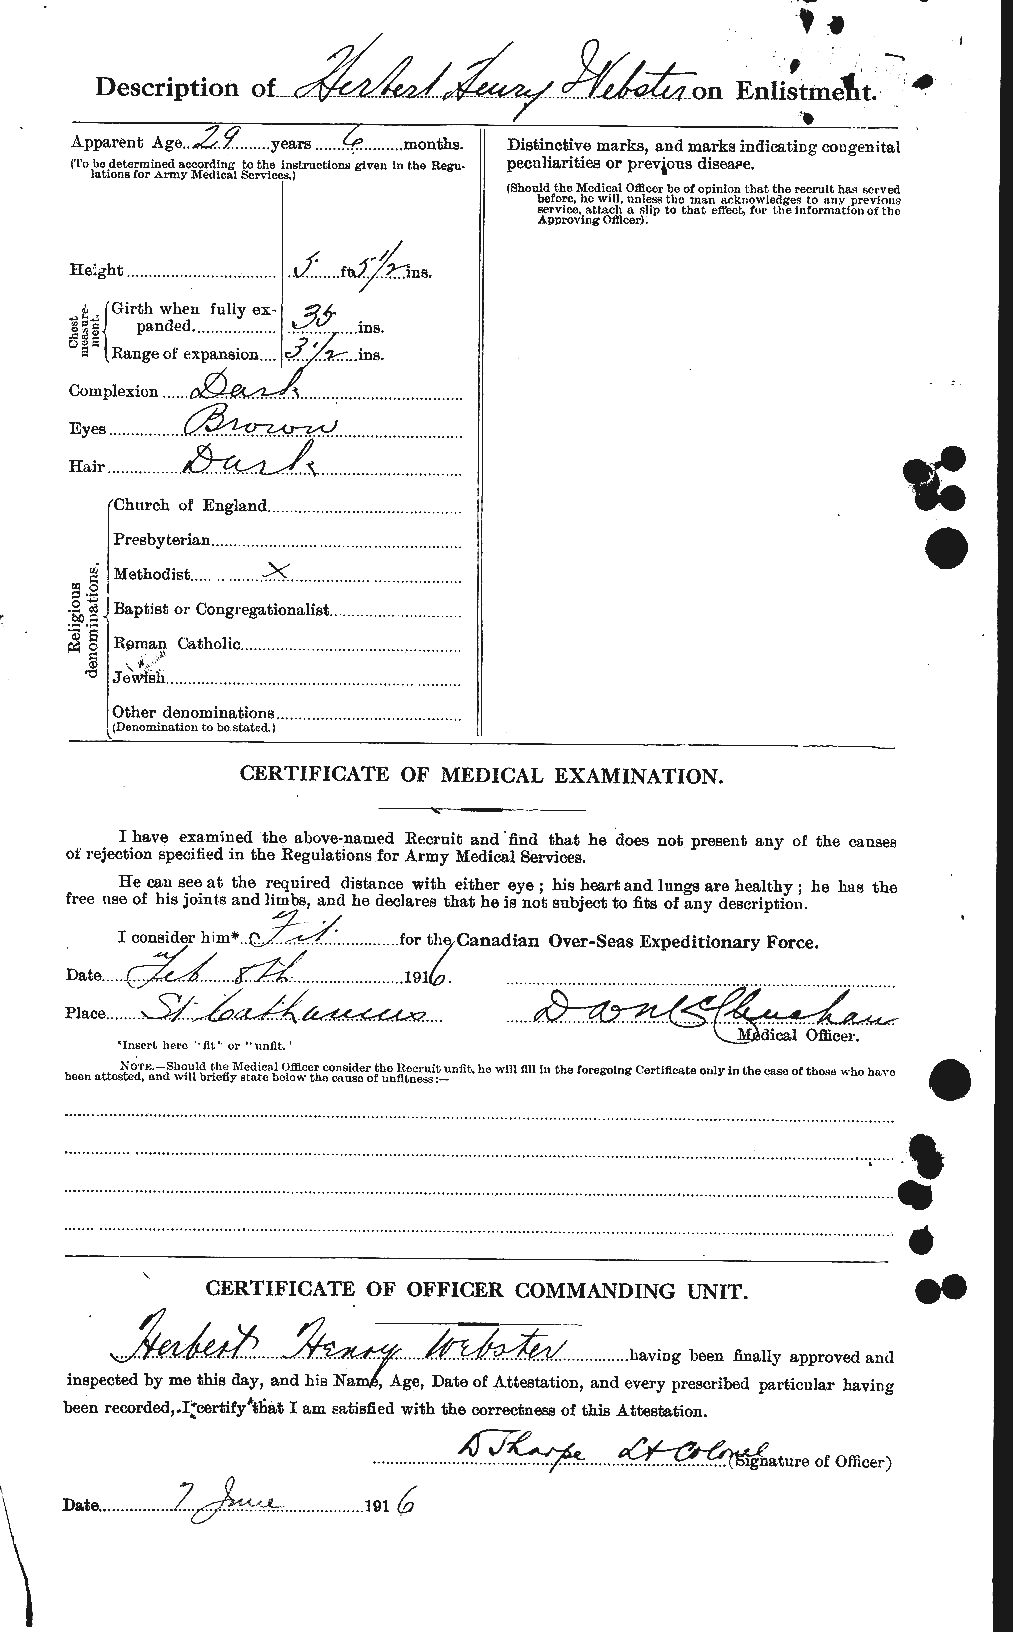 Personnel Records of the First World War - CEF 670436b